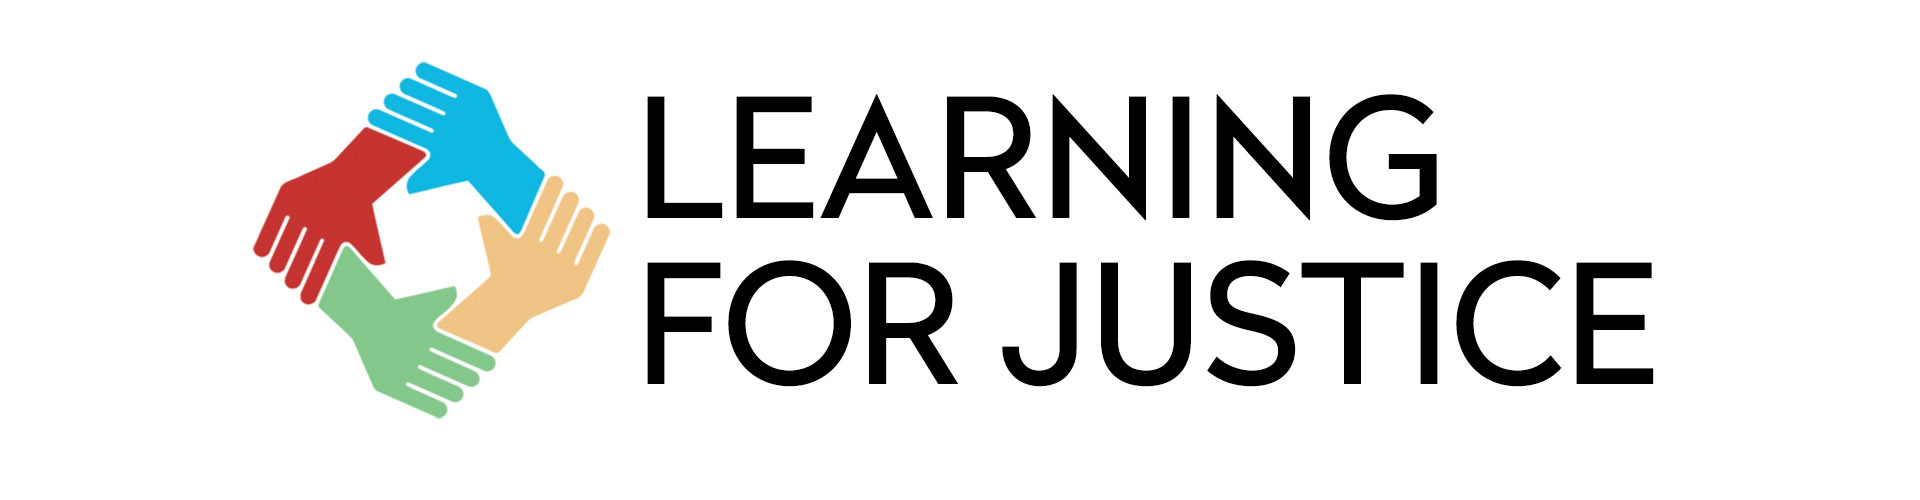 Learning for Justice